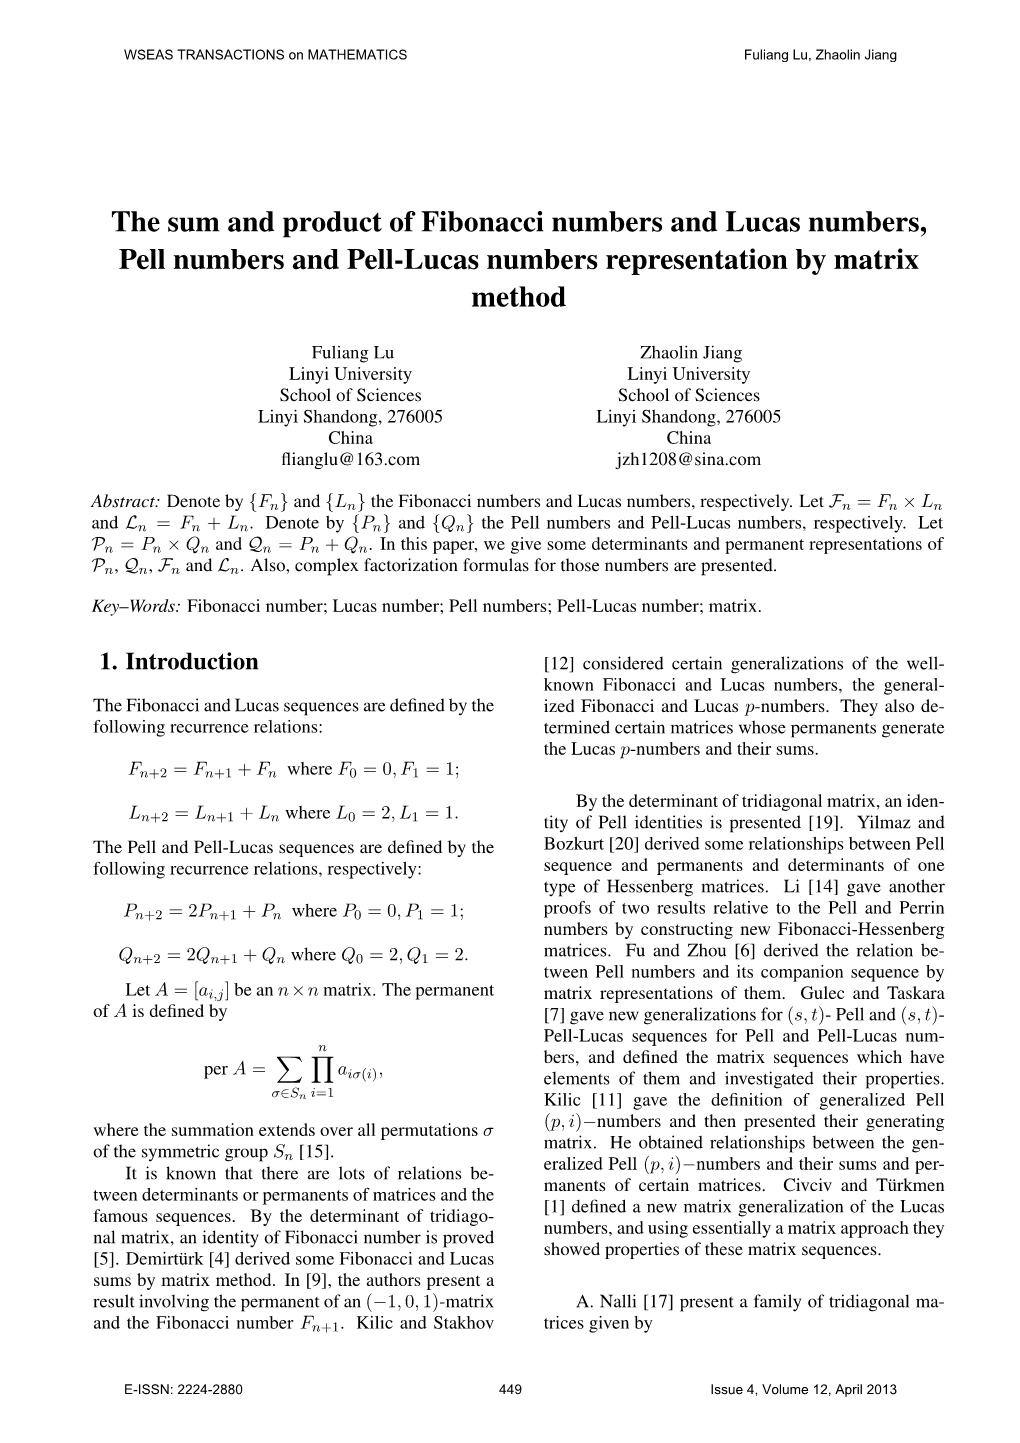 The Sum and Product of Fibonacci Numbers and Lucas Numbers, Pell Numbers and Pell-Lucas Numbers Representation by Matrix Method